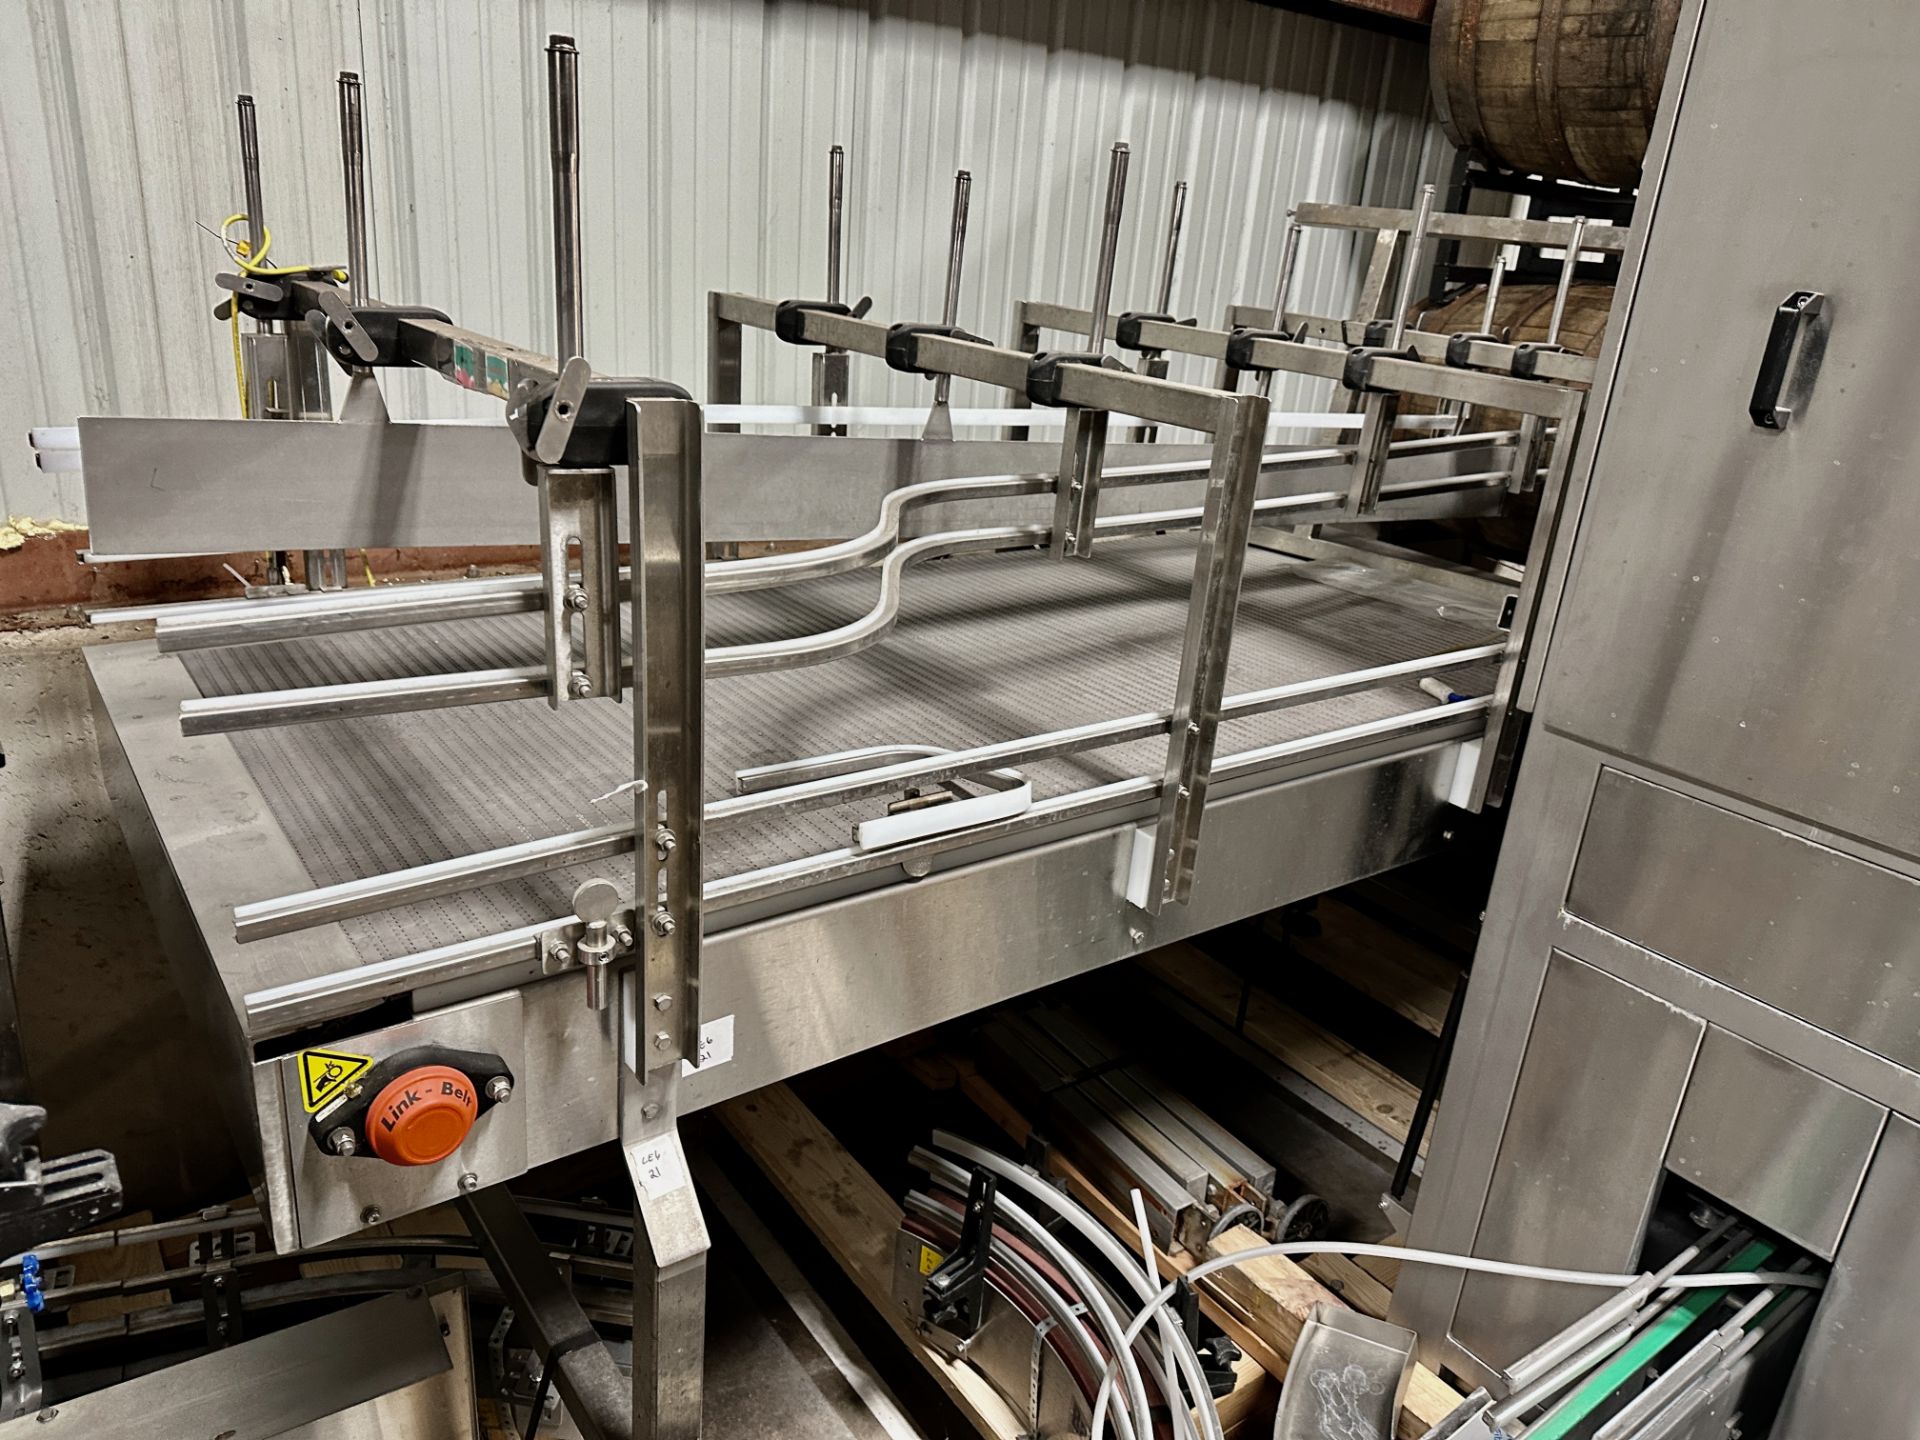 2019 KHS Innofill Can C Micro 18-Head Can Filler & 4-Head Seamer, Set for Sleek Cans, S/N: 10343324 - Image 21 of 21